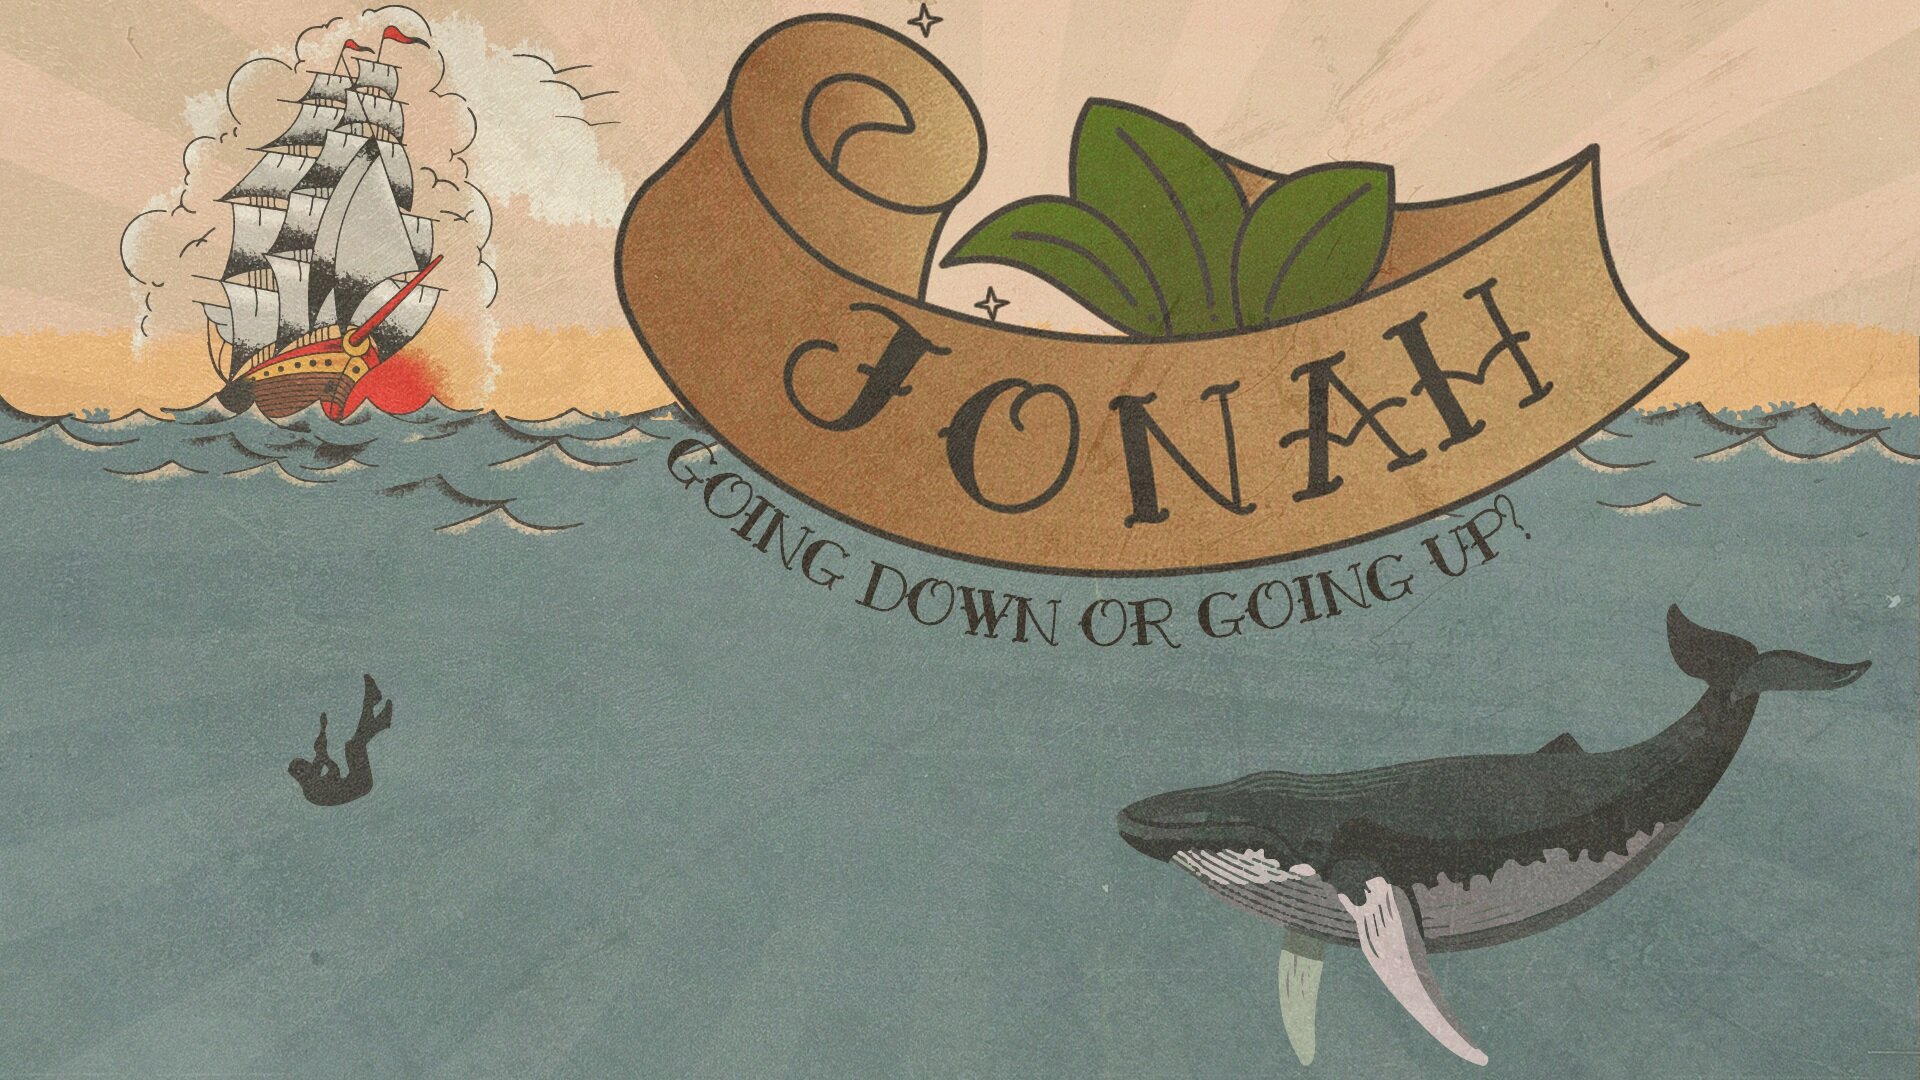 Jonah -Going Up or Going Down